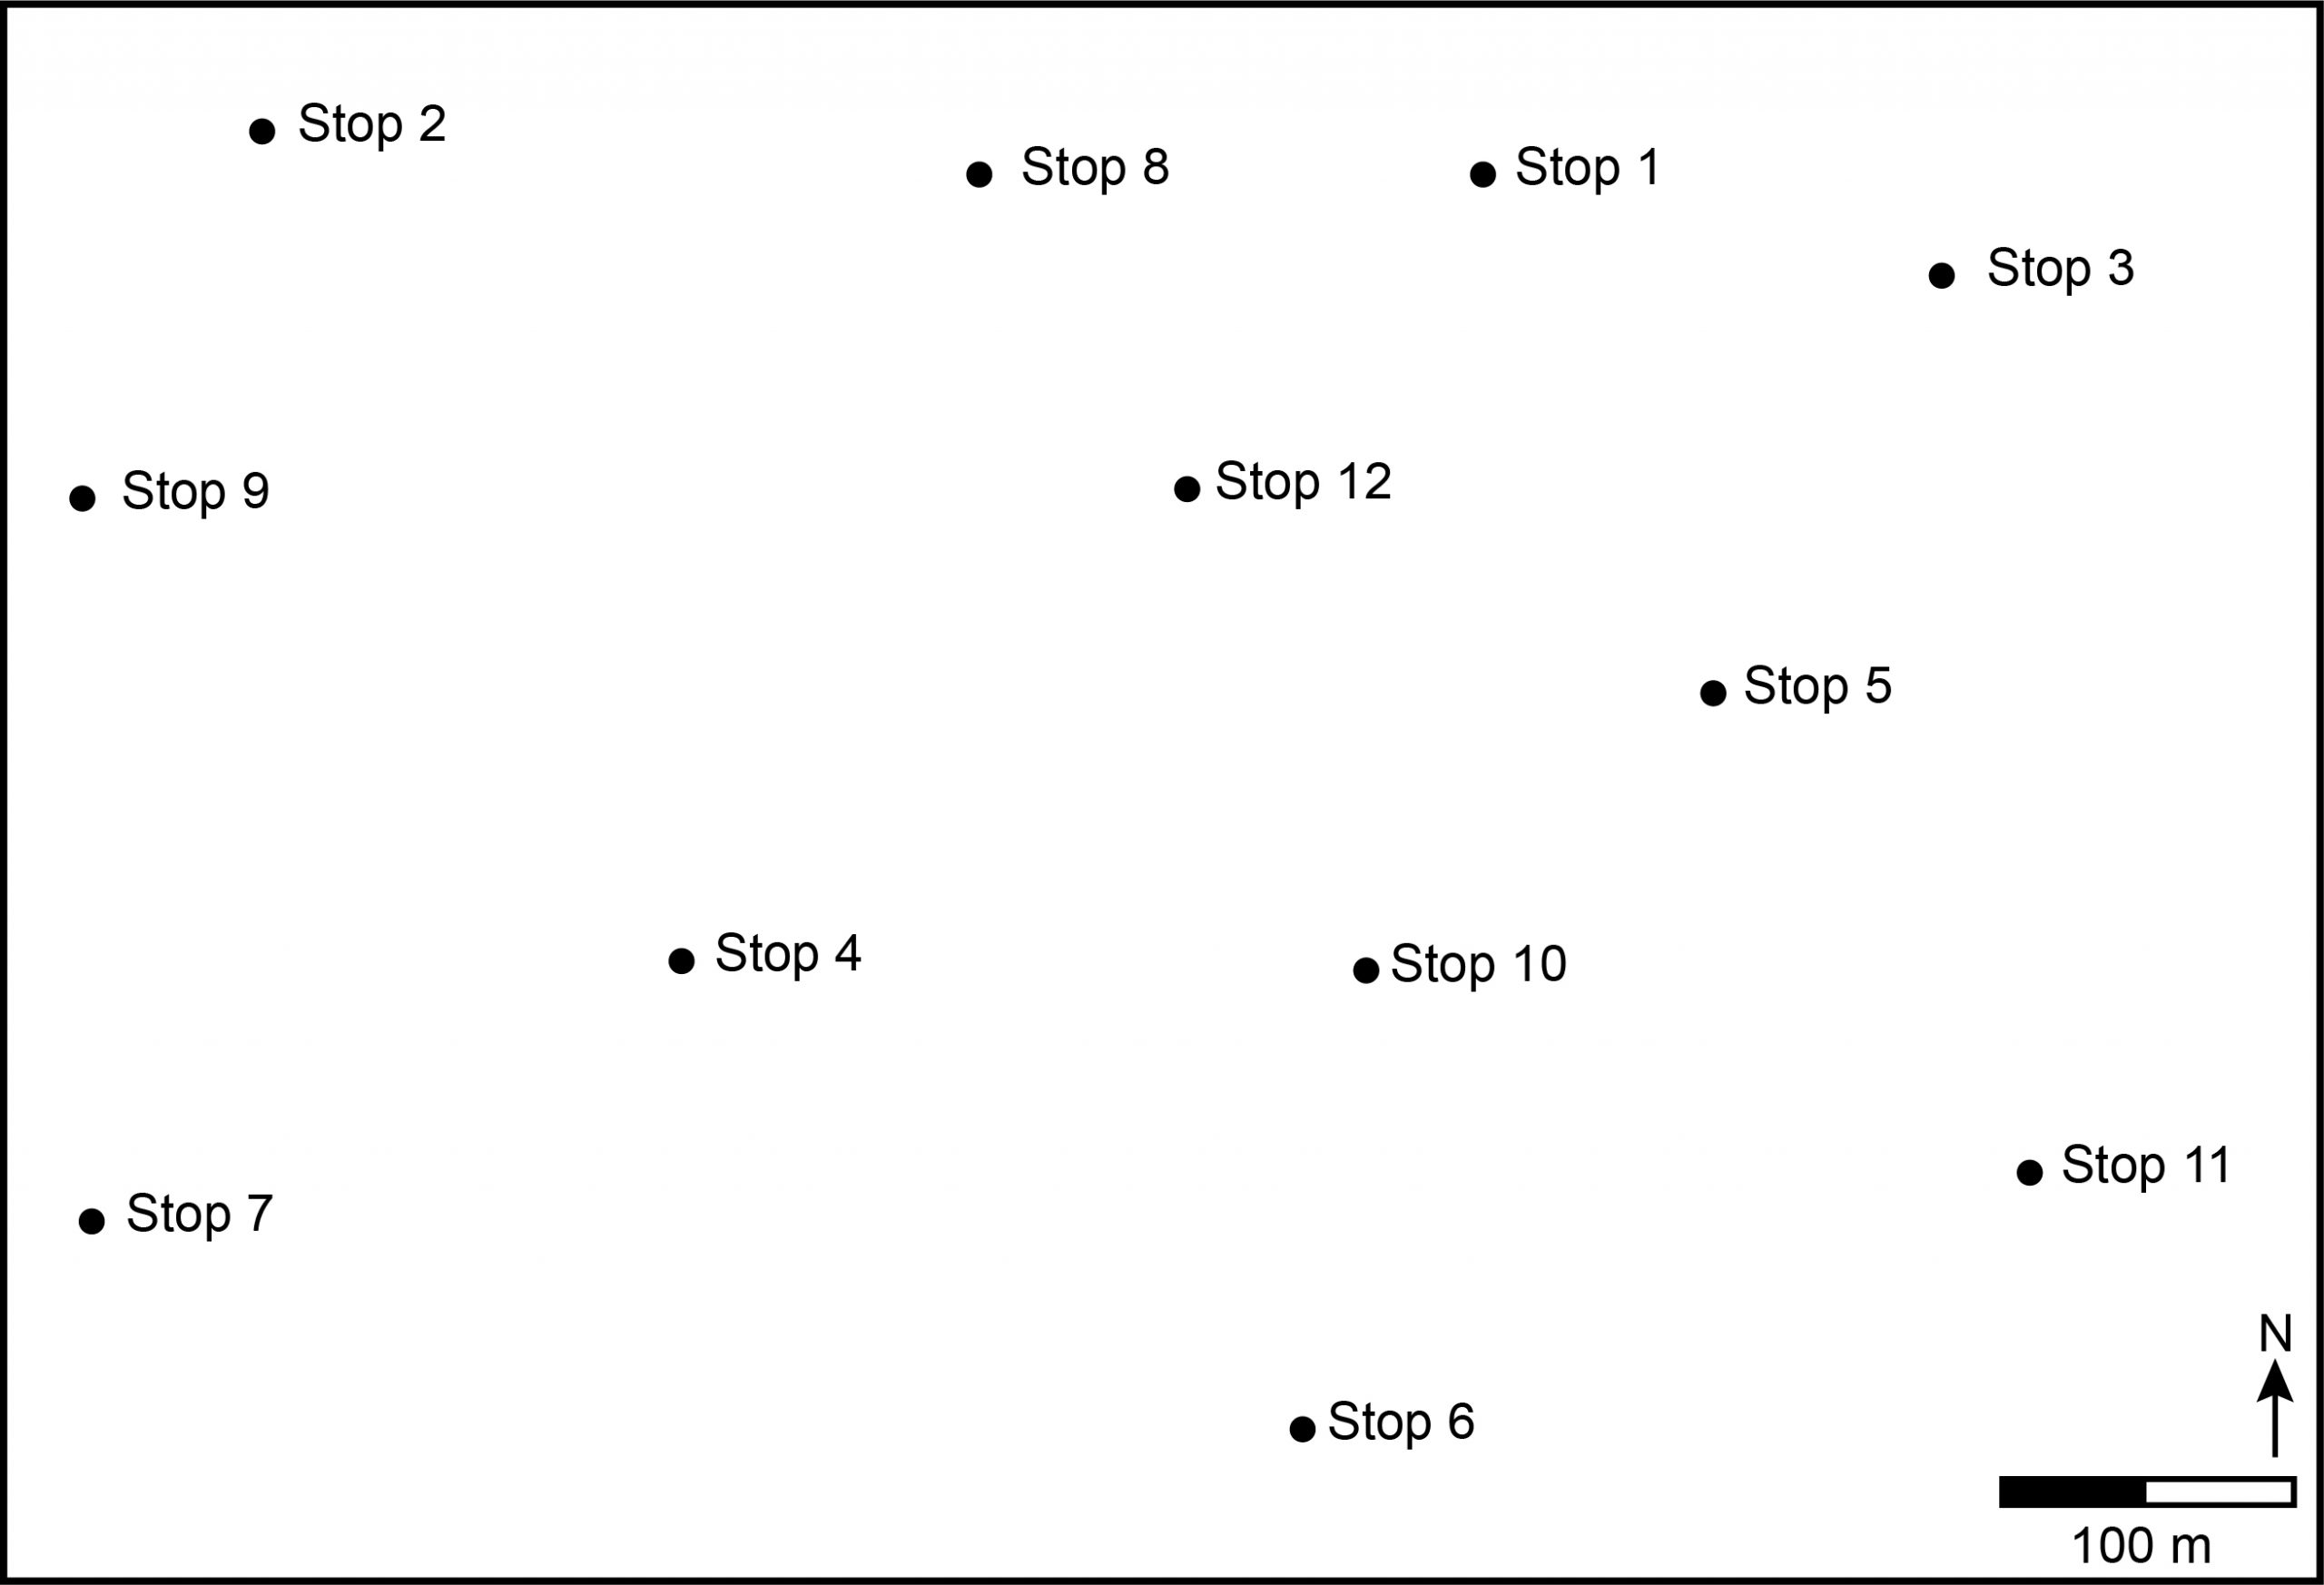 Location map for Stops 1-12 for this exercise